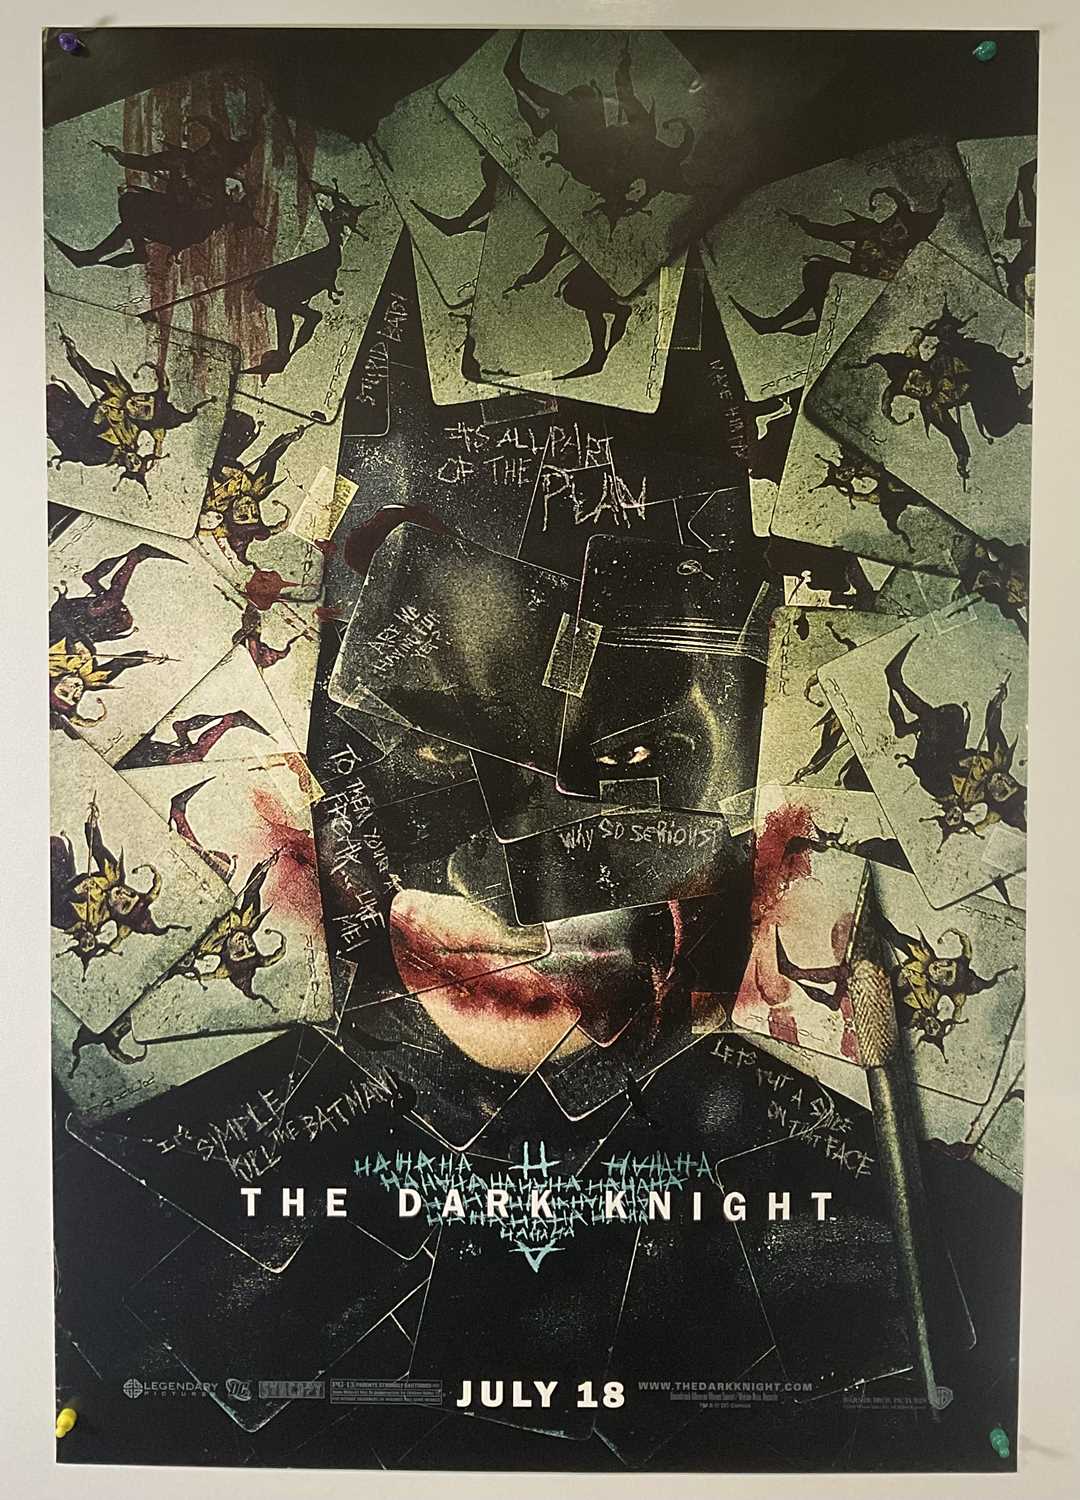 THE DARK KNIGHT (2008) Us one sheet, wildings style where image is made up of joker playing cards,